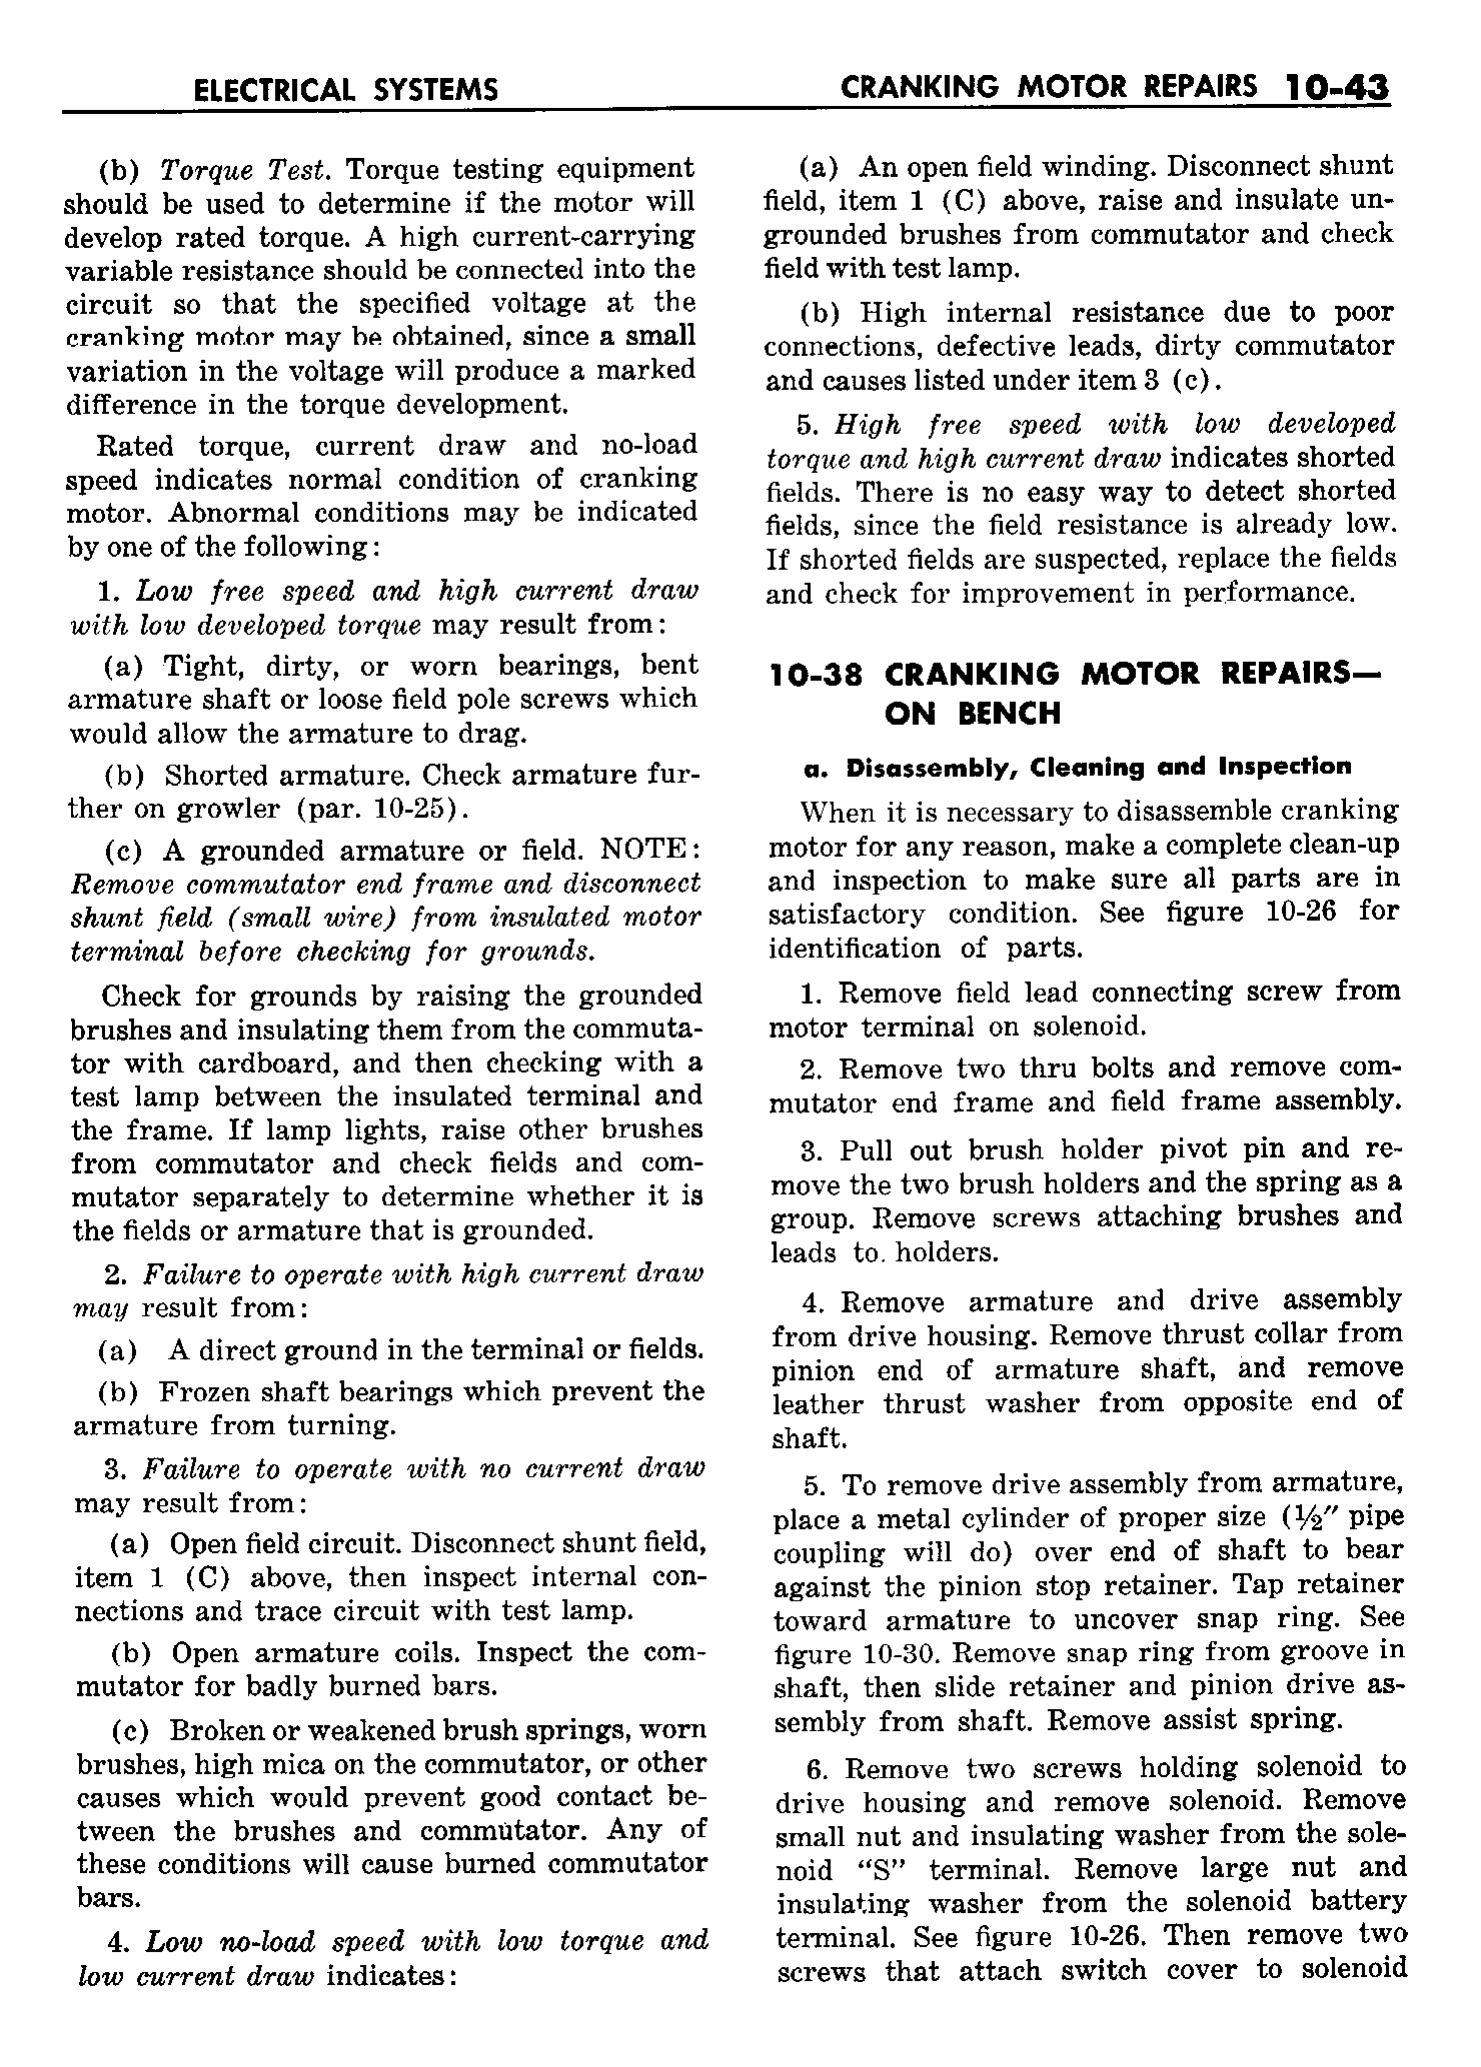 n_11 1958 Buick Shop Manual - Electrical Systems_43.jpg